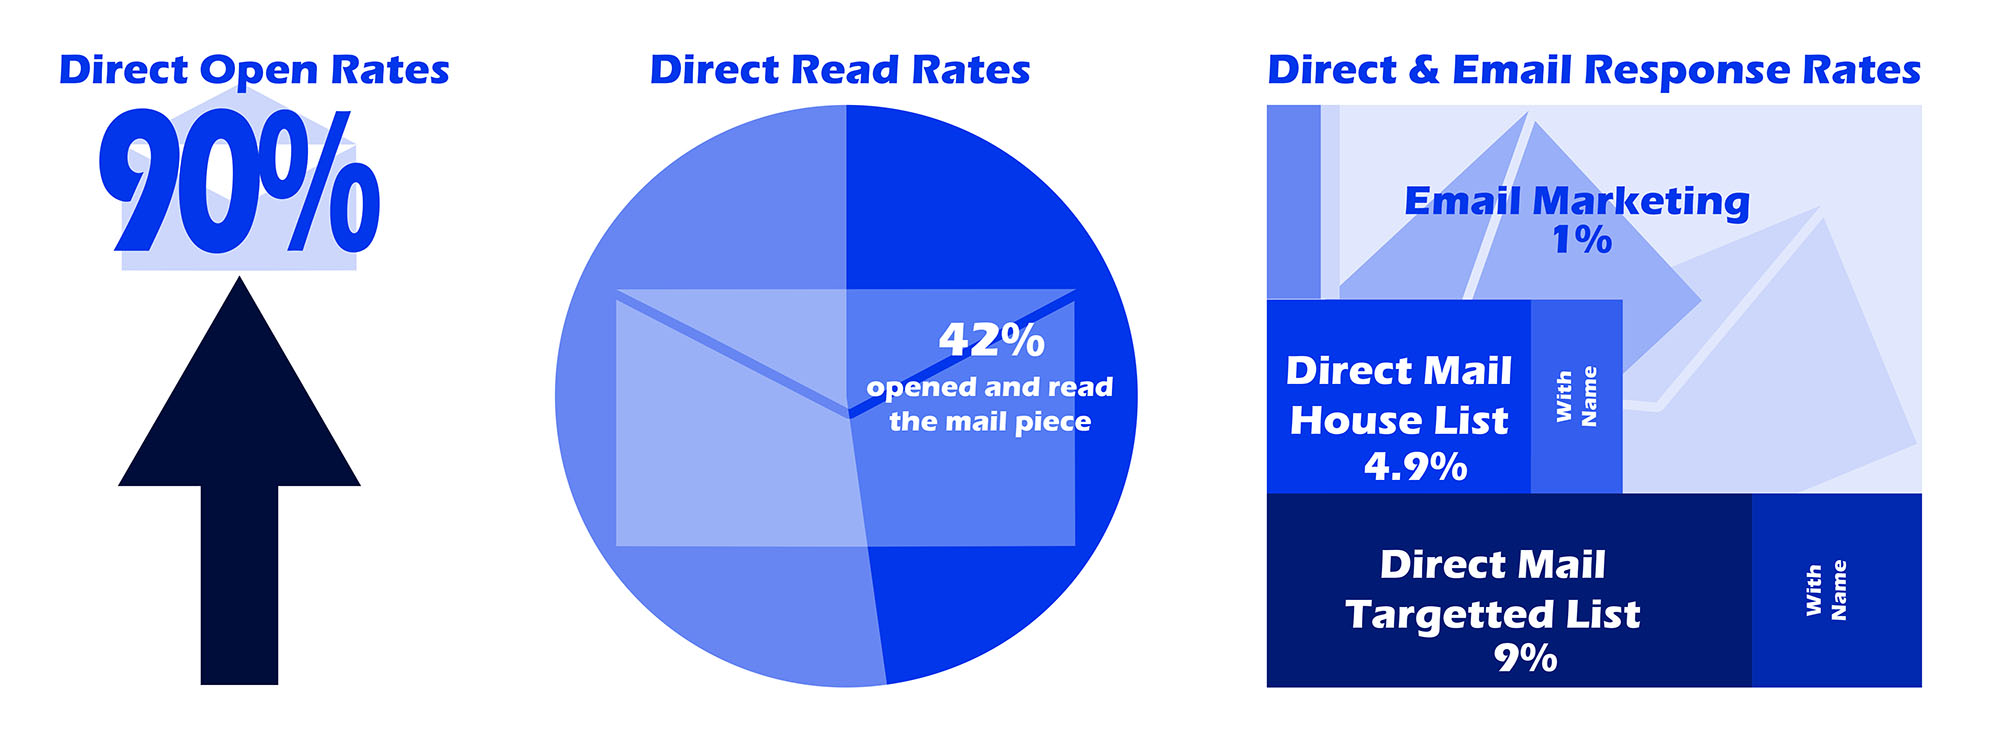 Direct mail response rates are higher than email response rates